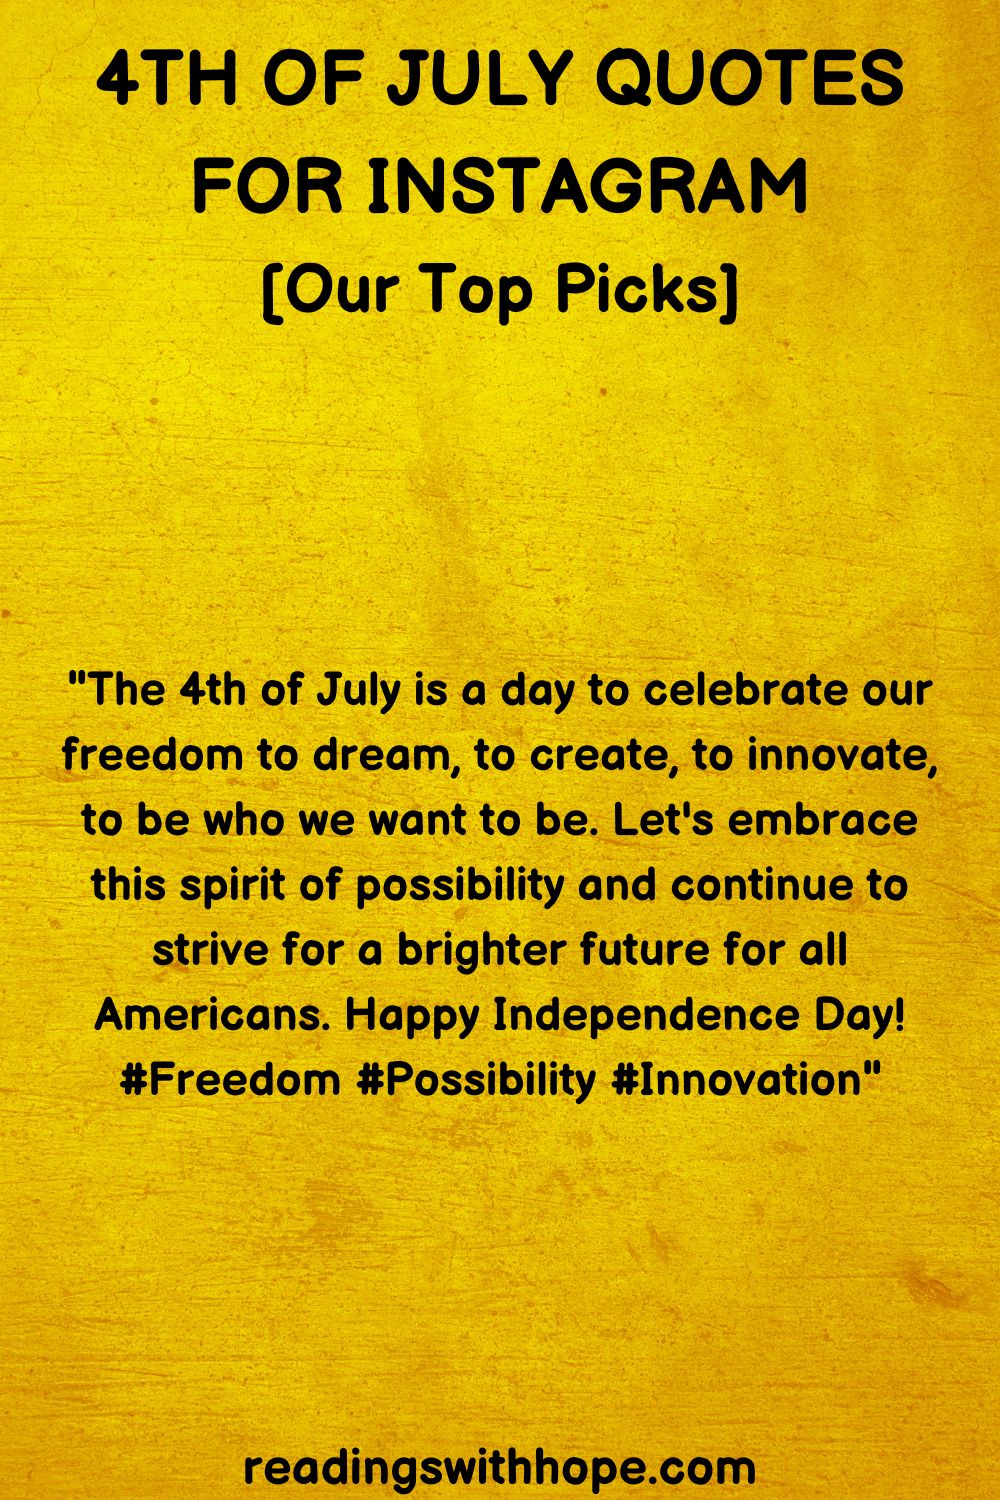 4th of July Quotes For Instagram